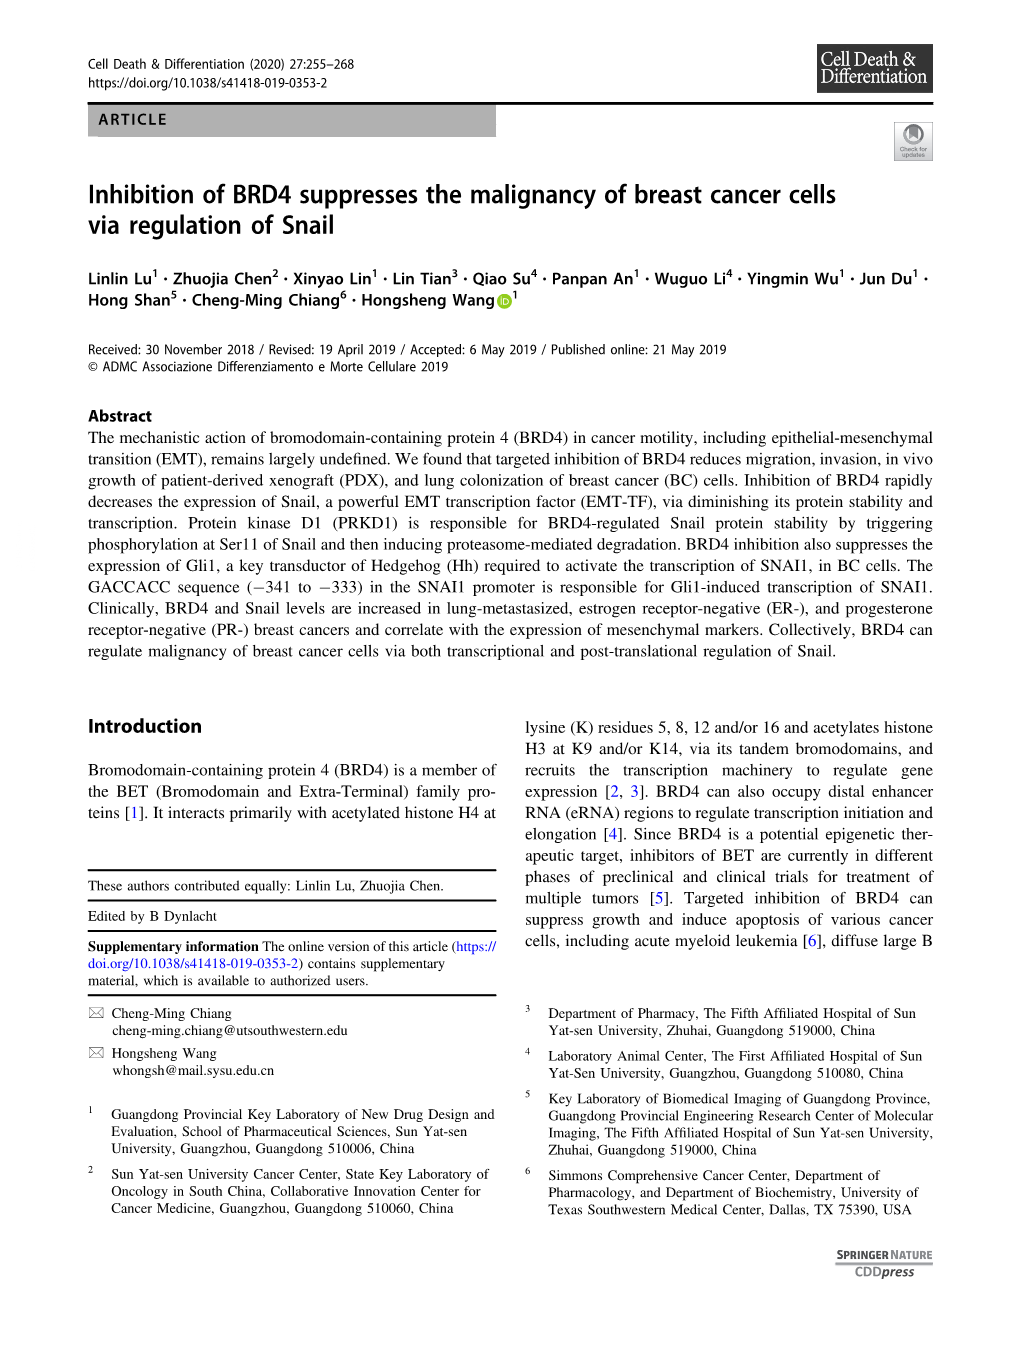 Inhibition of BRD4 Suppresses the Malignancy of Breast Cancer Cells Via Regulation of Snail